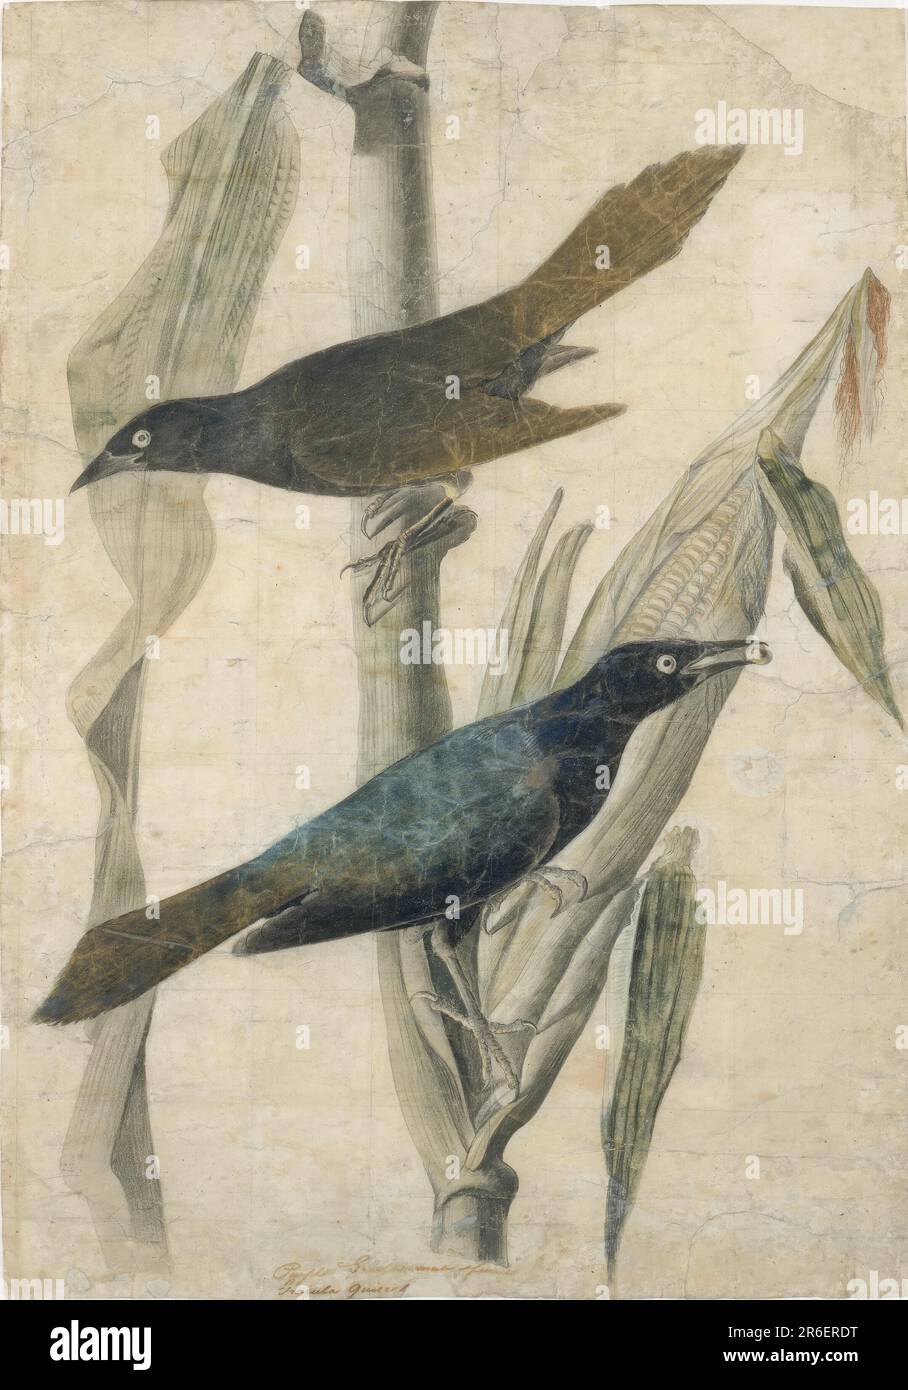 Purple Grackle. Date: n.d. watercolor, pencil, chalk and ink on paper. Museum: Smithsonian American Art Museum. Stock Photo